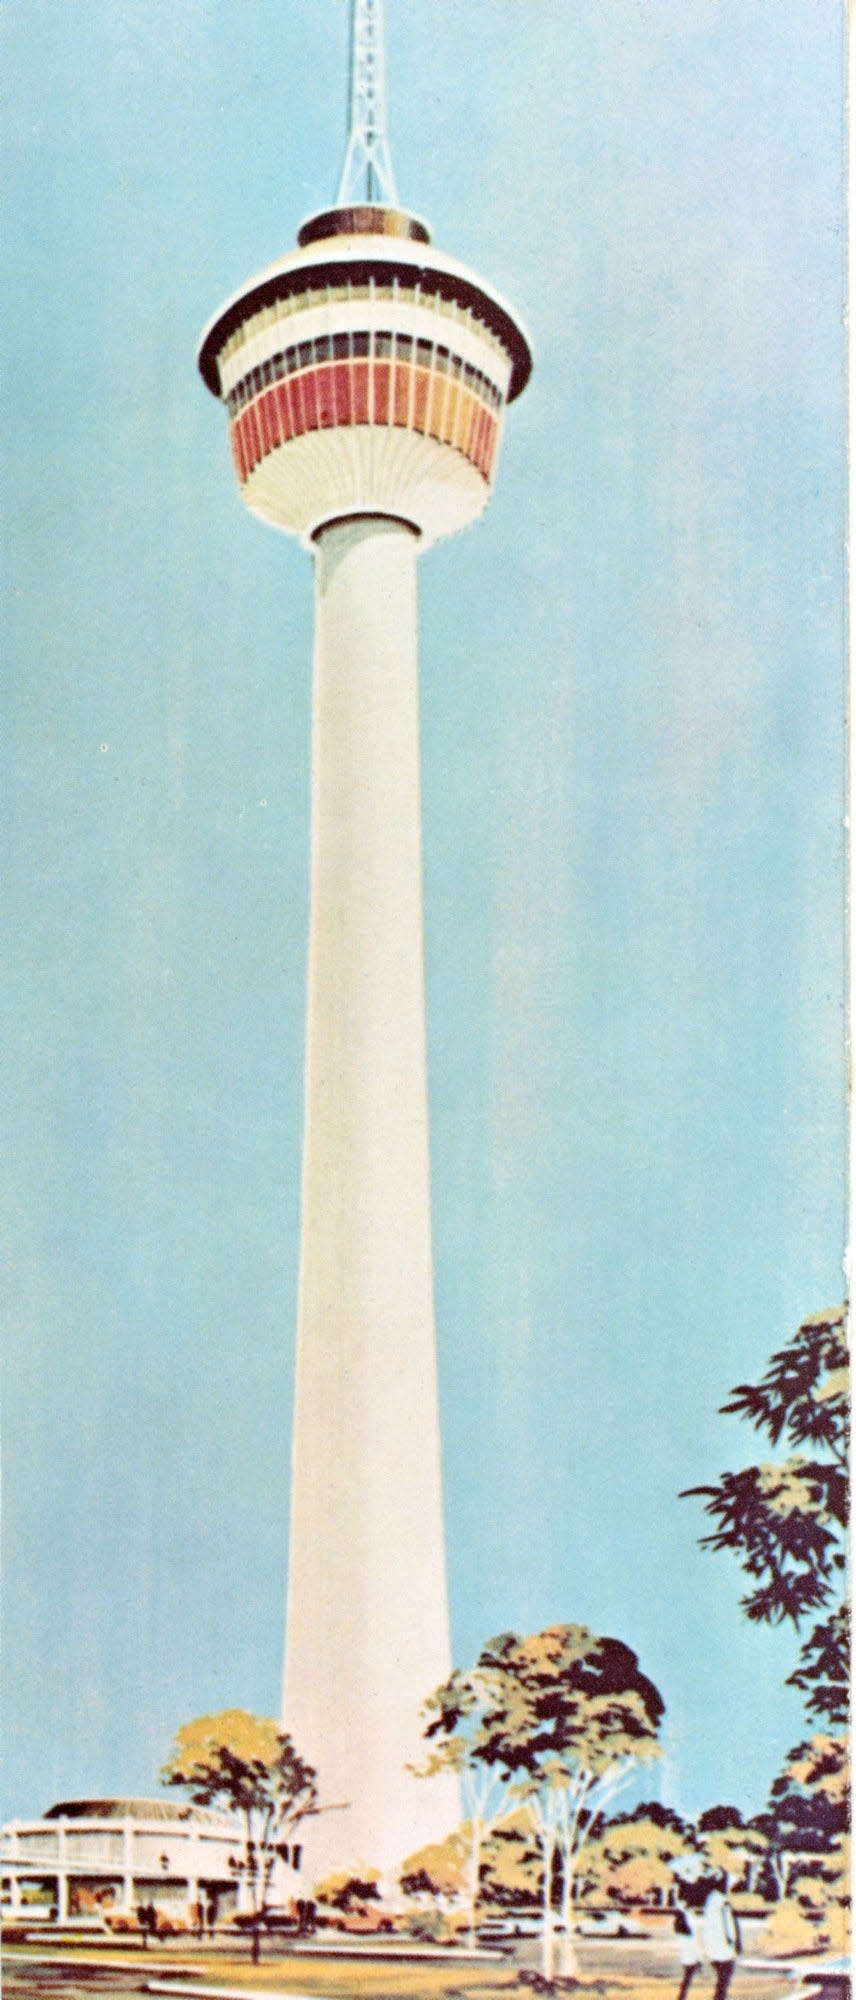 This beautiful spire is how the Rev. Rex Humbard envisioned the Cathedral Tower at State Road and Portage Trail in Cuyahoga Falls. The 750-foot structure would have been the tallest building in Ohio and seventh tallest in the United States.